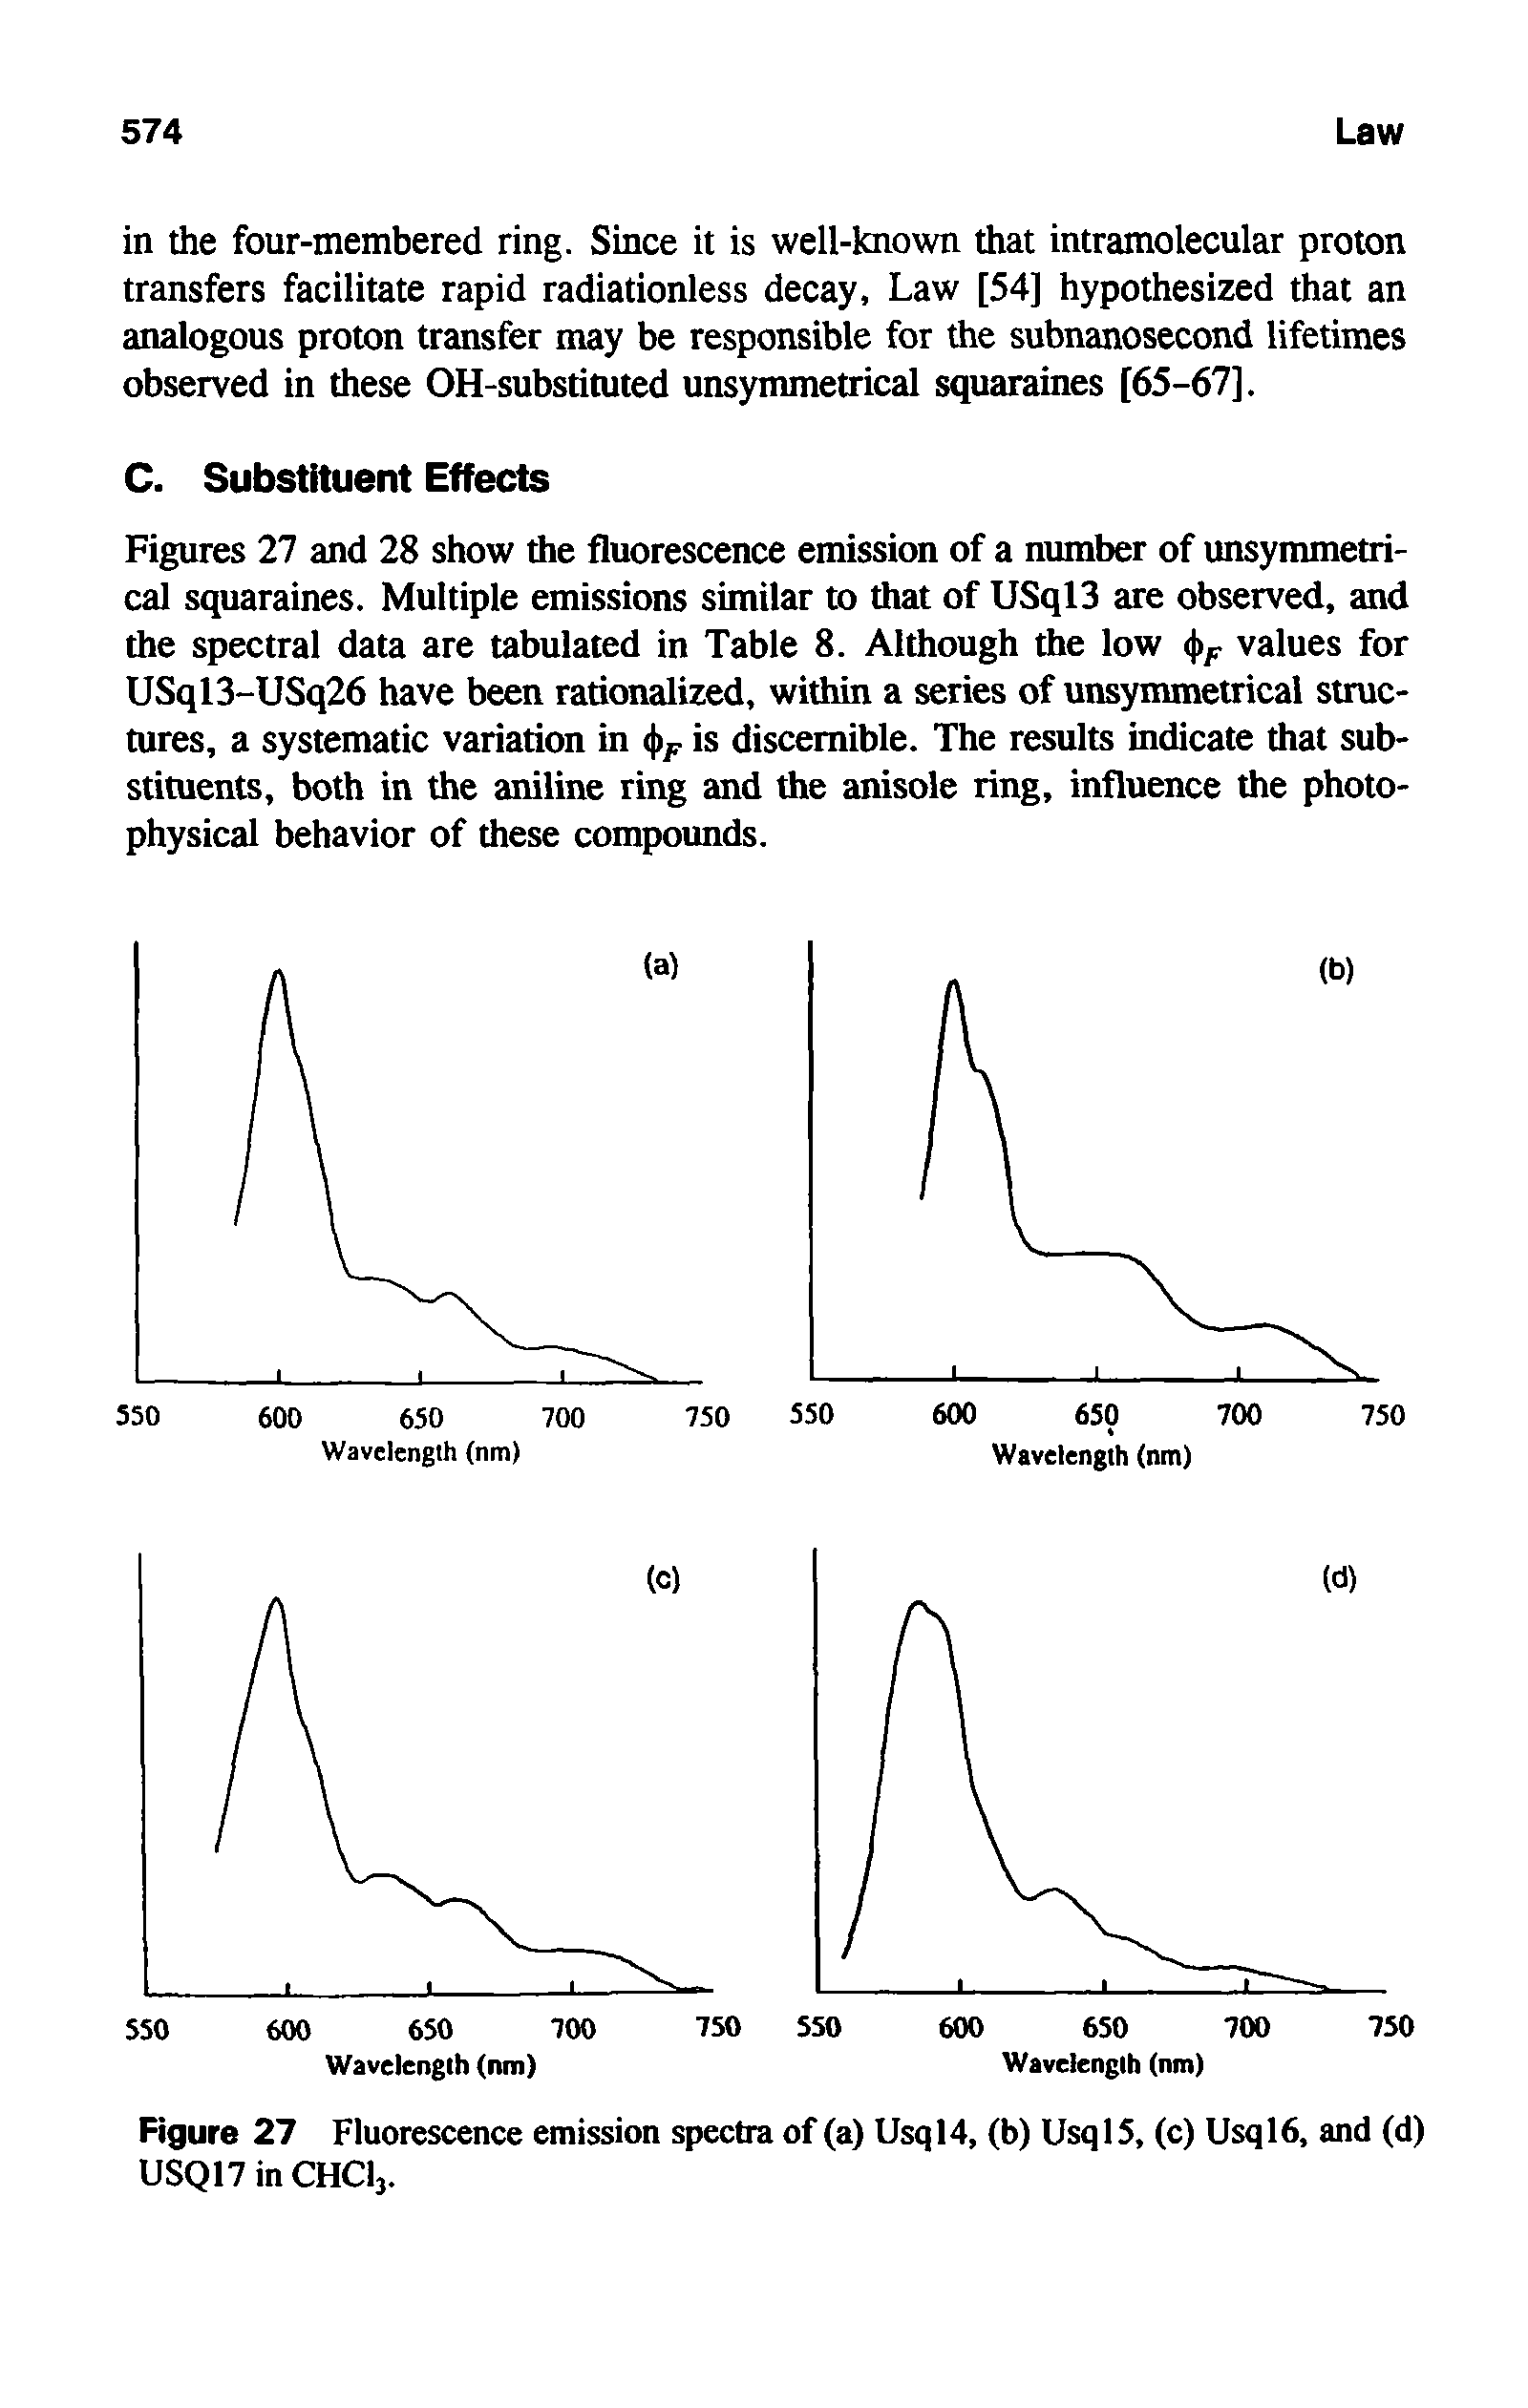 Figures 27 and 28 show the fluorescence emission of a number of unsymmetrical squaraines. Multiple emissions similar to that of USql3 are observed, and the spectral data are tabulated in Table 8. Although the low values for USql3-USq26 have been rationalized, within a series of unsymmetrical structures, a systematic variation in < )yr is discernible. The results indicate that substituents, both in the aniline ring and the anisole ring, influence the photophysical behavior of these compounds.